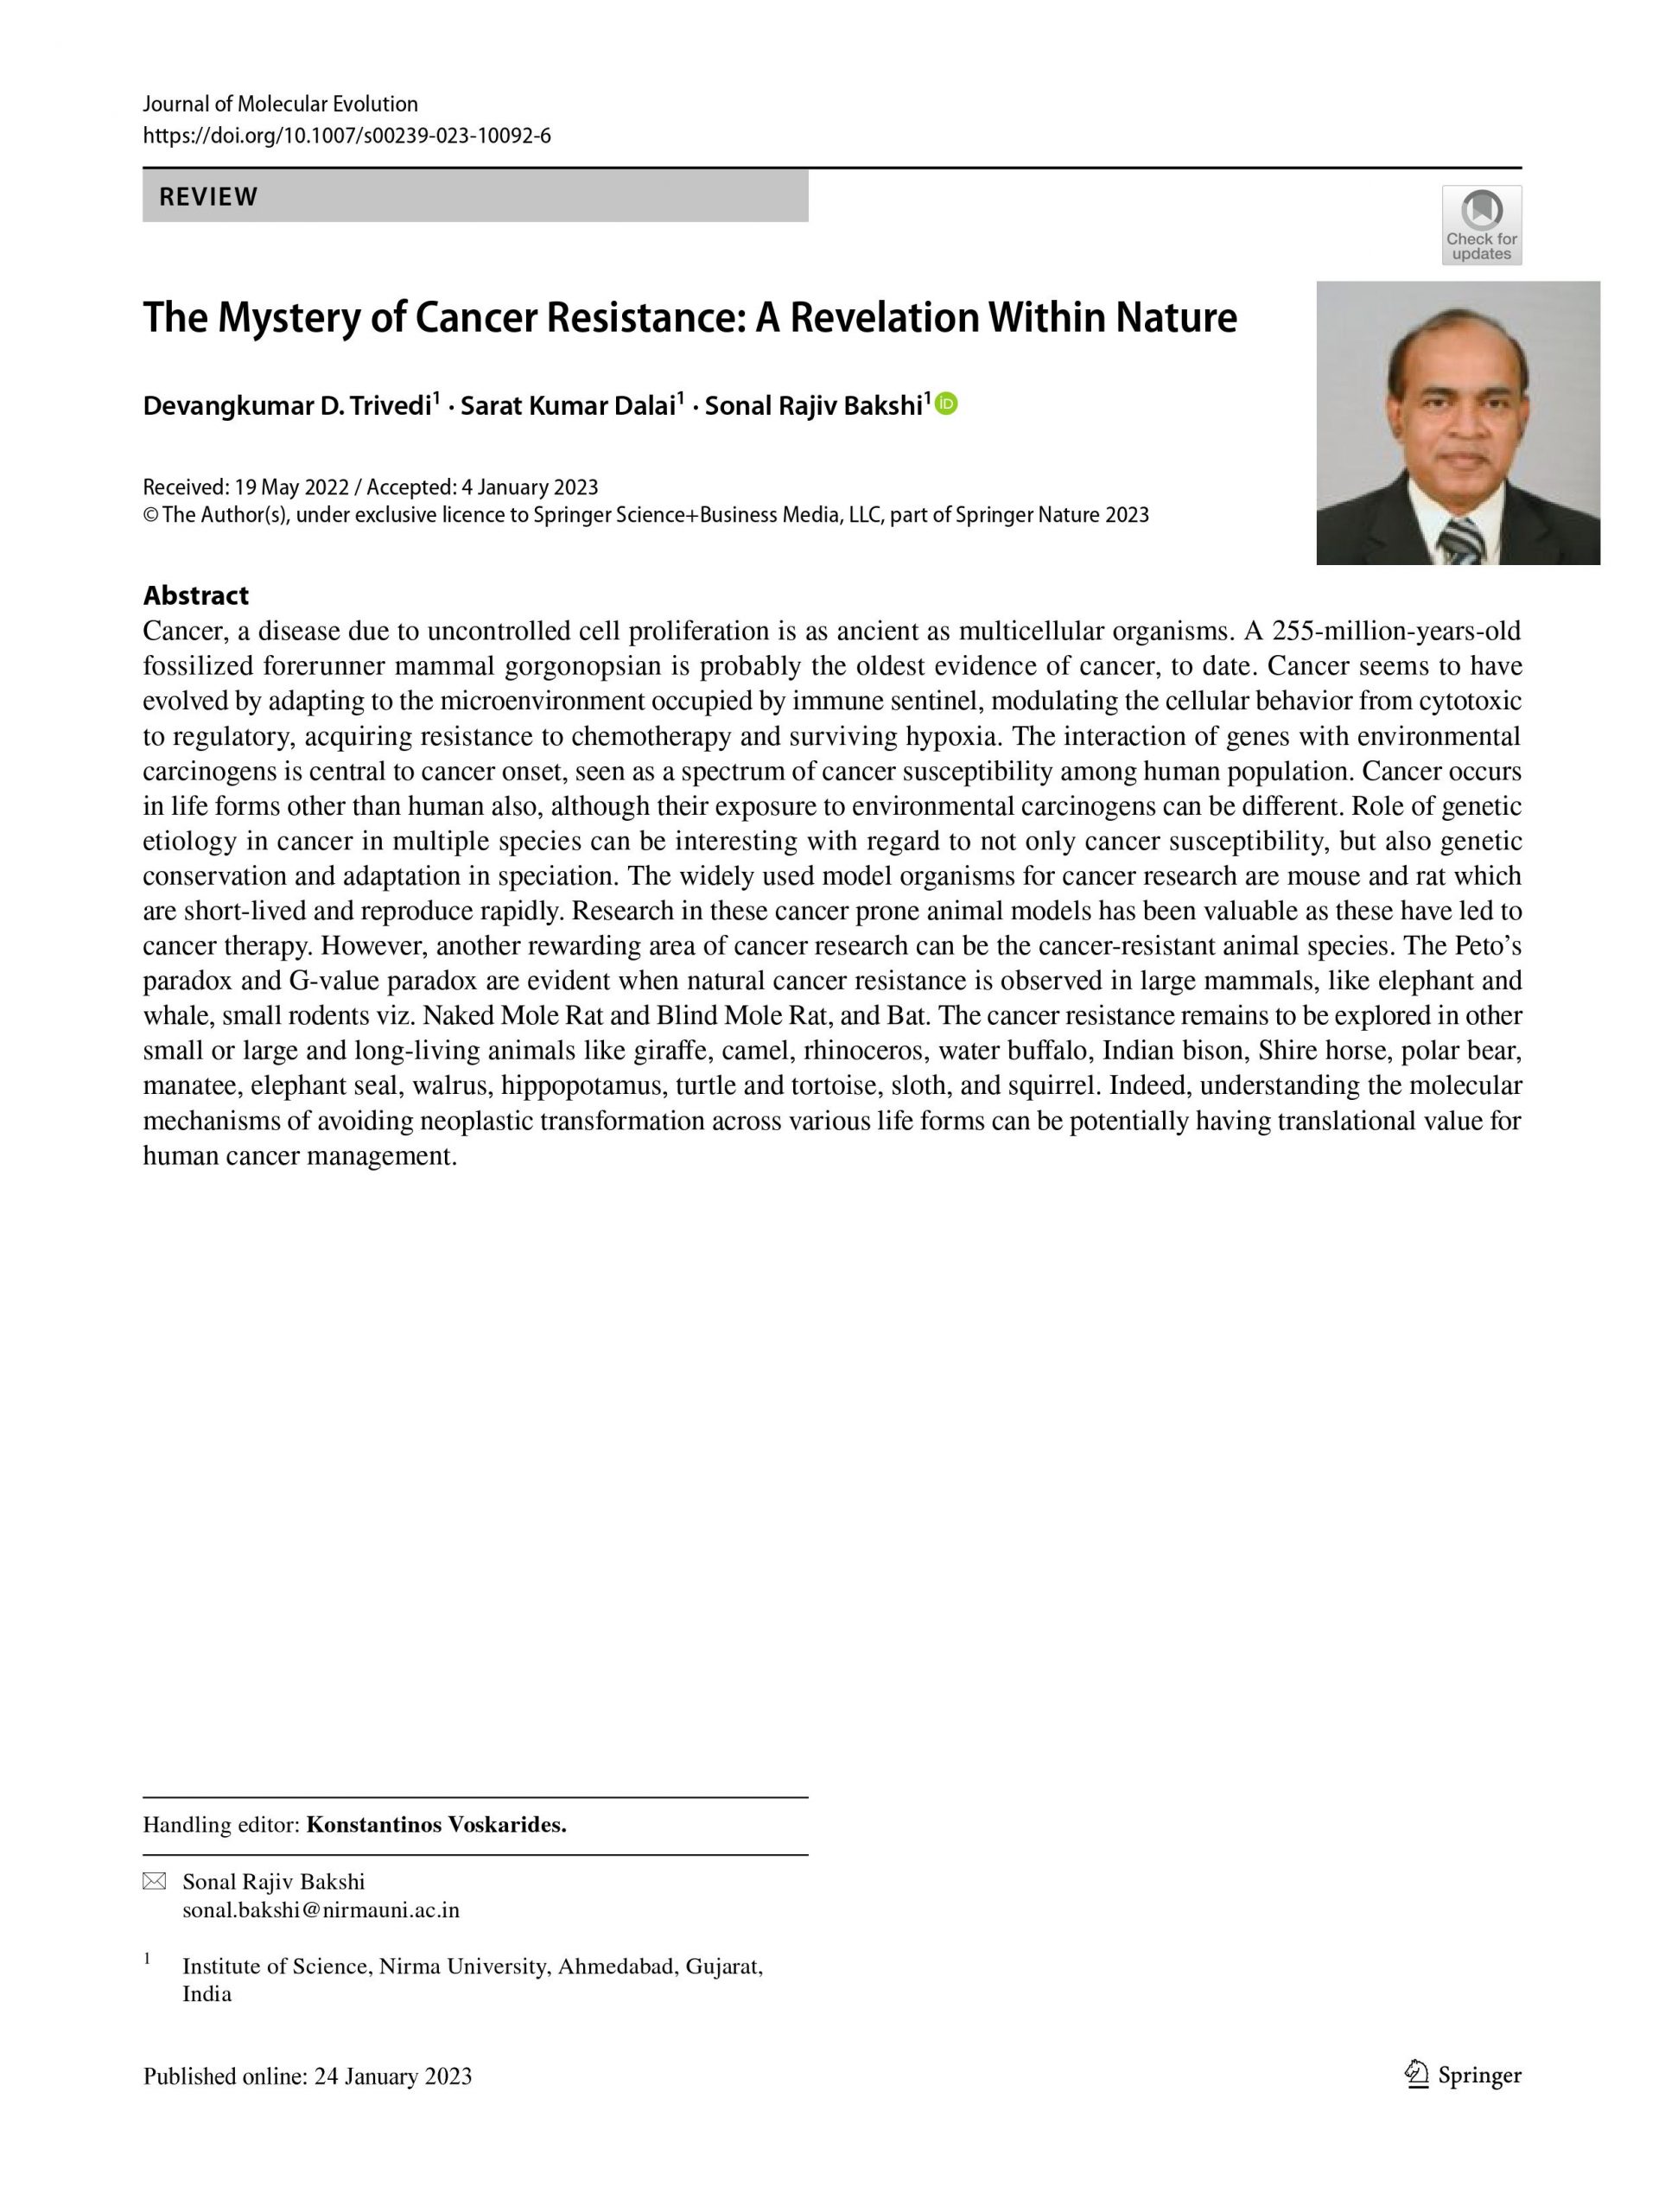 The Mystery of Cancer Resistance: A Revelation Within Nature